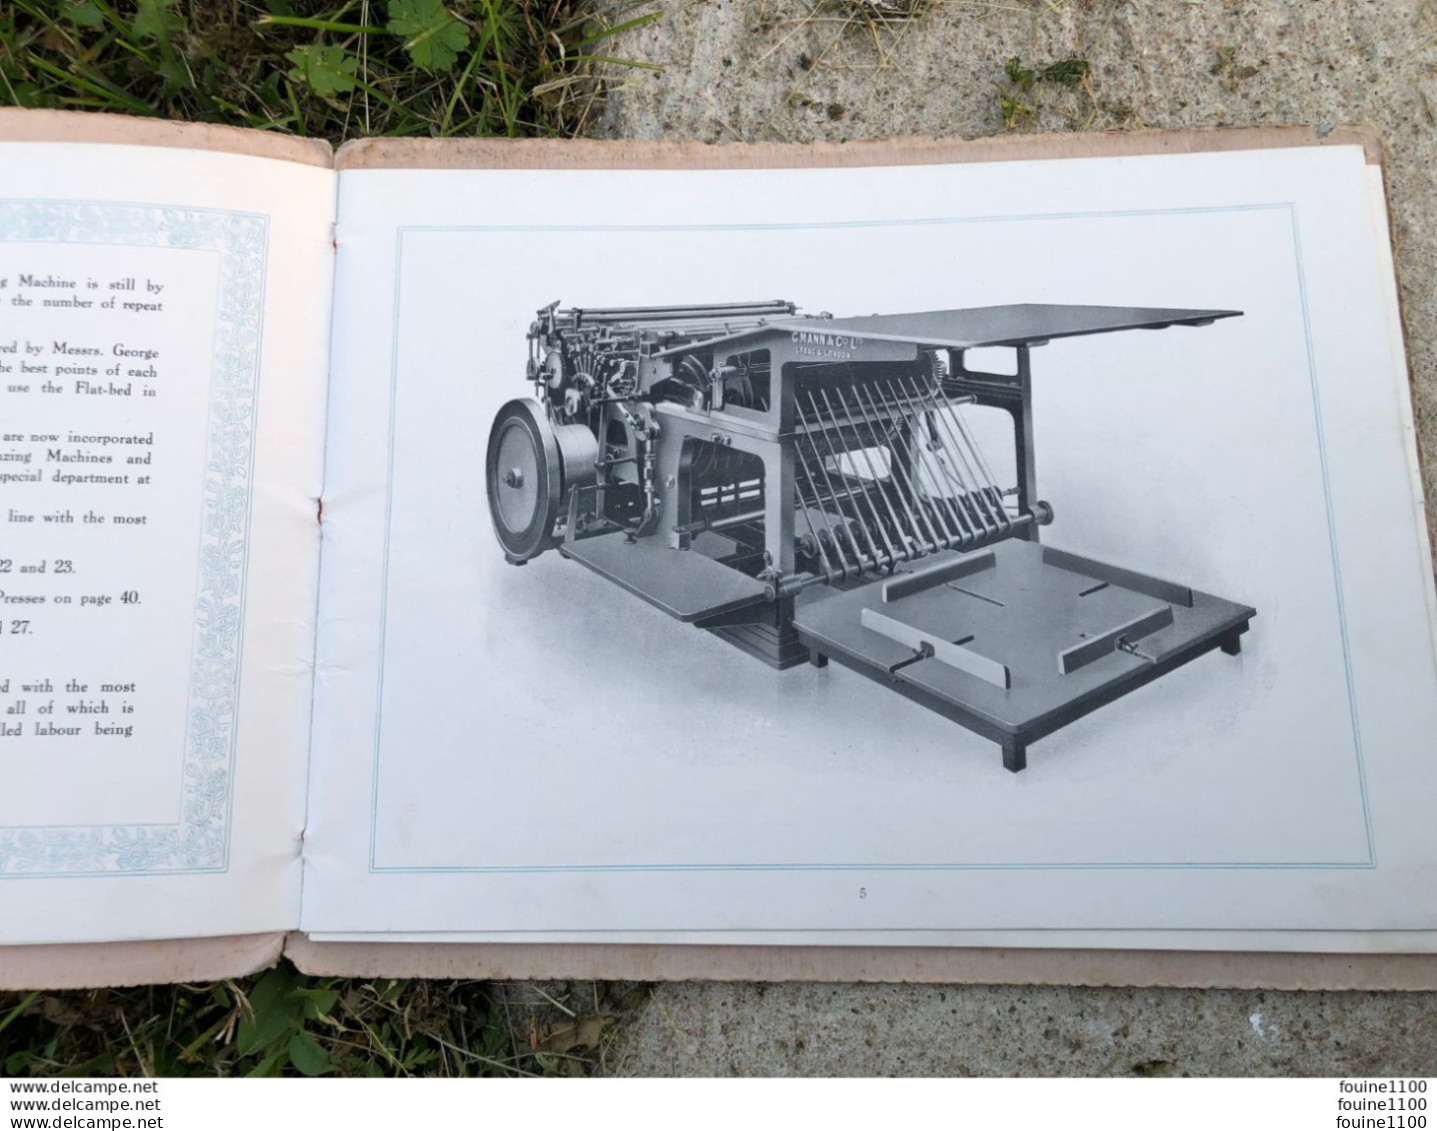 Catalogue MACHINES D'IMPRIMERIE PRESSES ROTATIVES TYPOGRAPHIQUES Georges MANN & Co LEEDS Machinery Lithographic Rotary - Unclassified